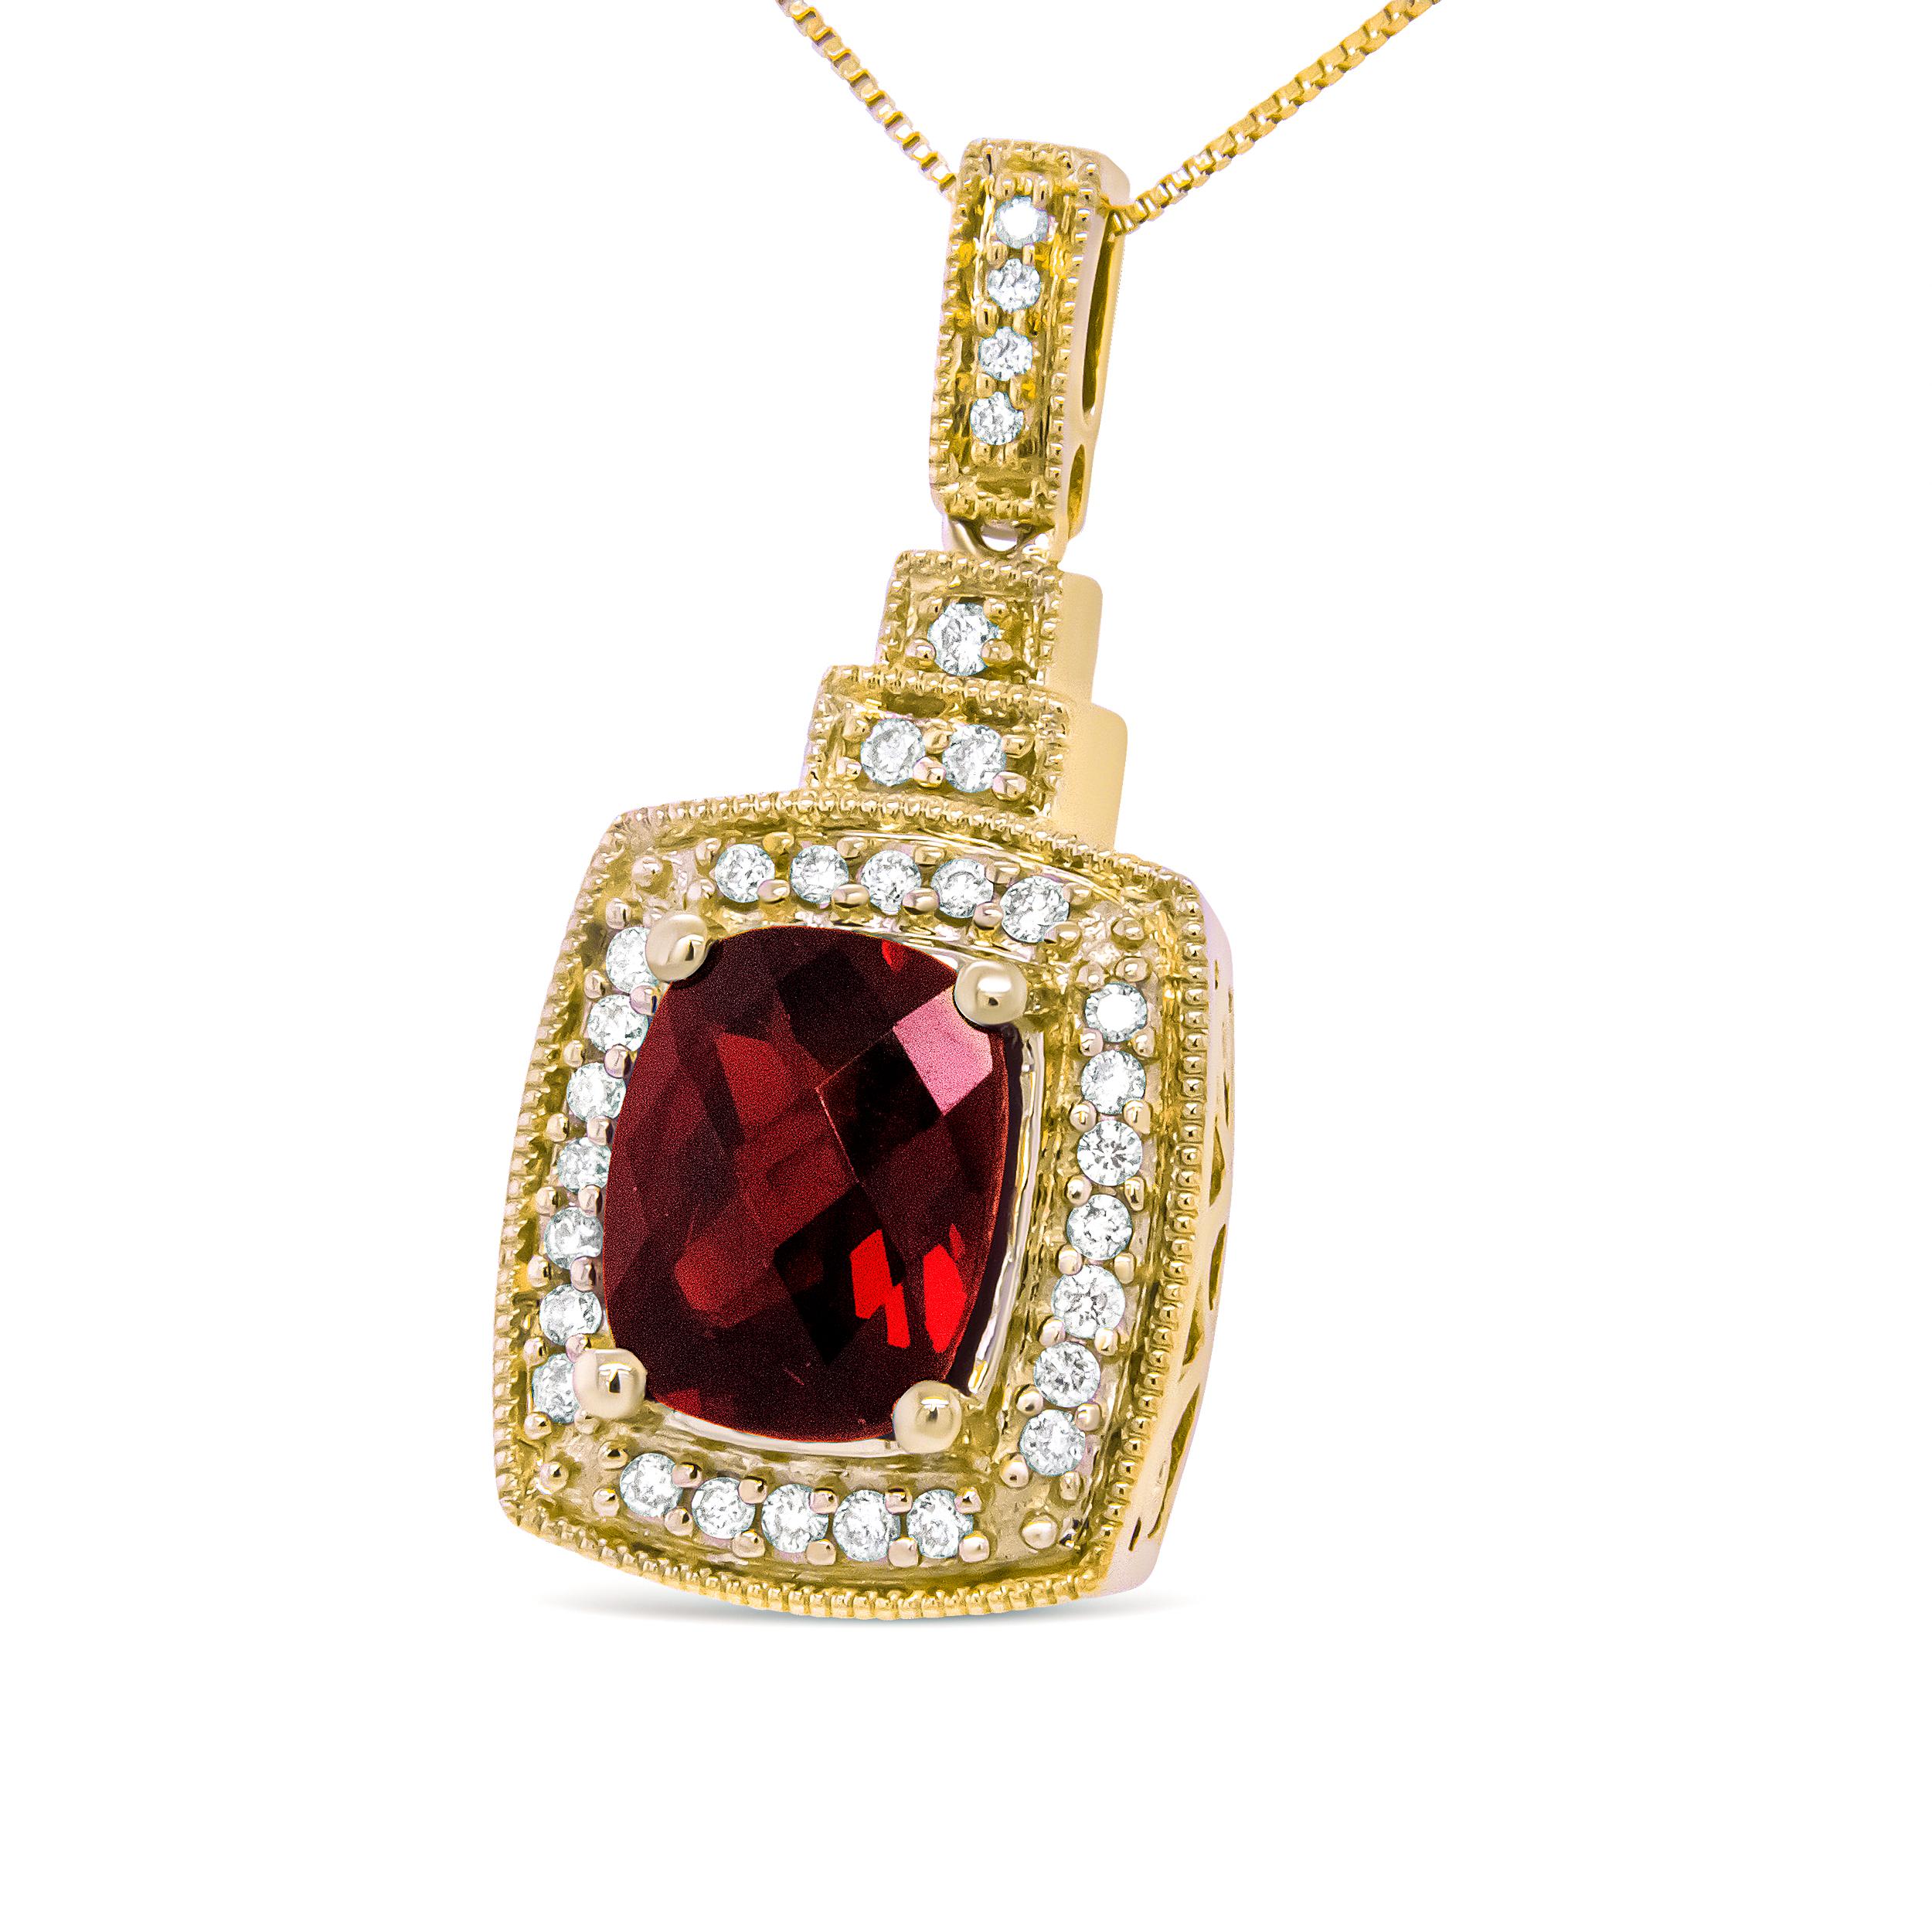 Contemporary 14K Yellow Gold 1/5 Carat Diamond and Red Garnet Halo Pendant Necklace